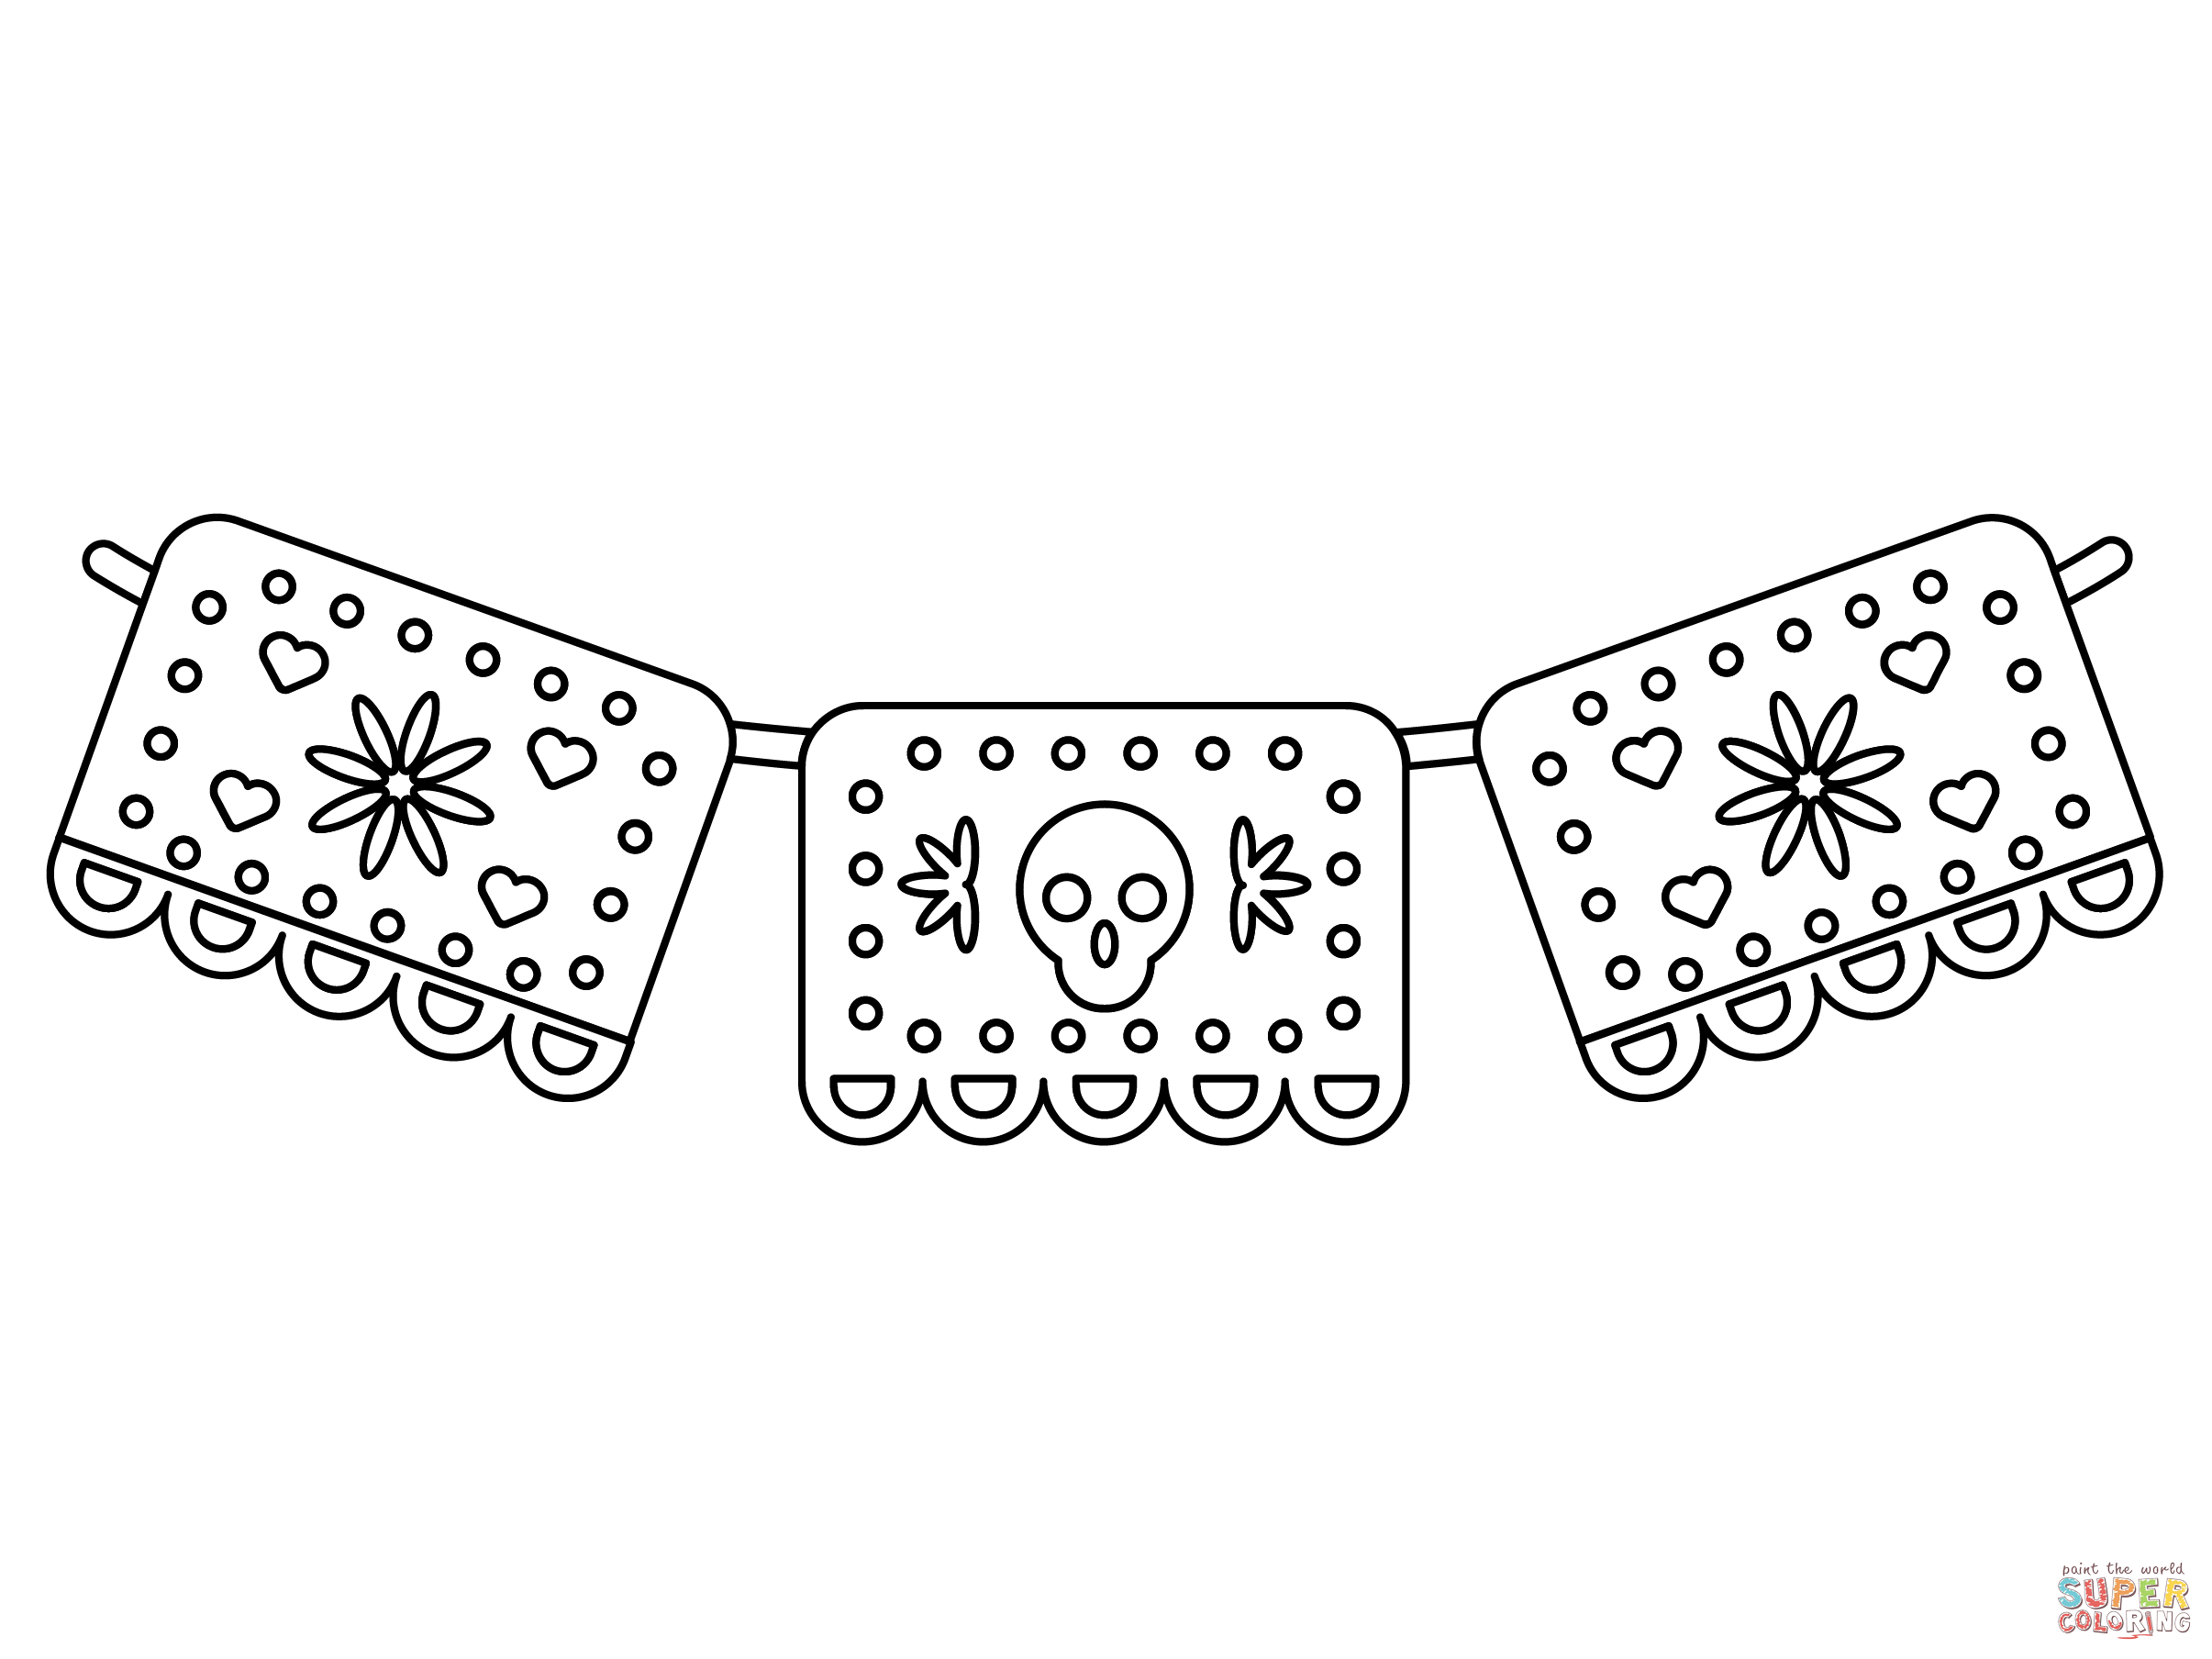 Papel Picado Coloring Page Free Printable Coloring Pages